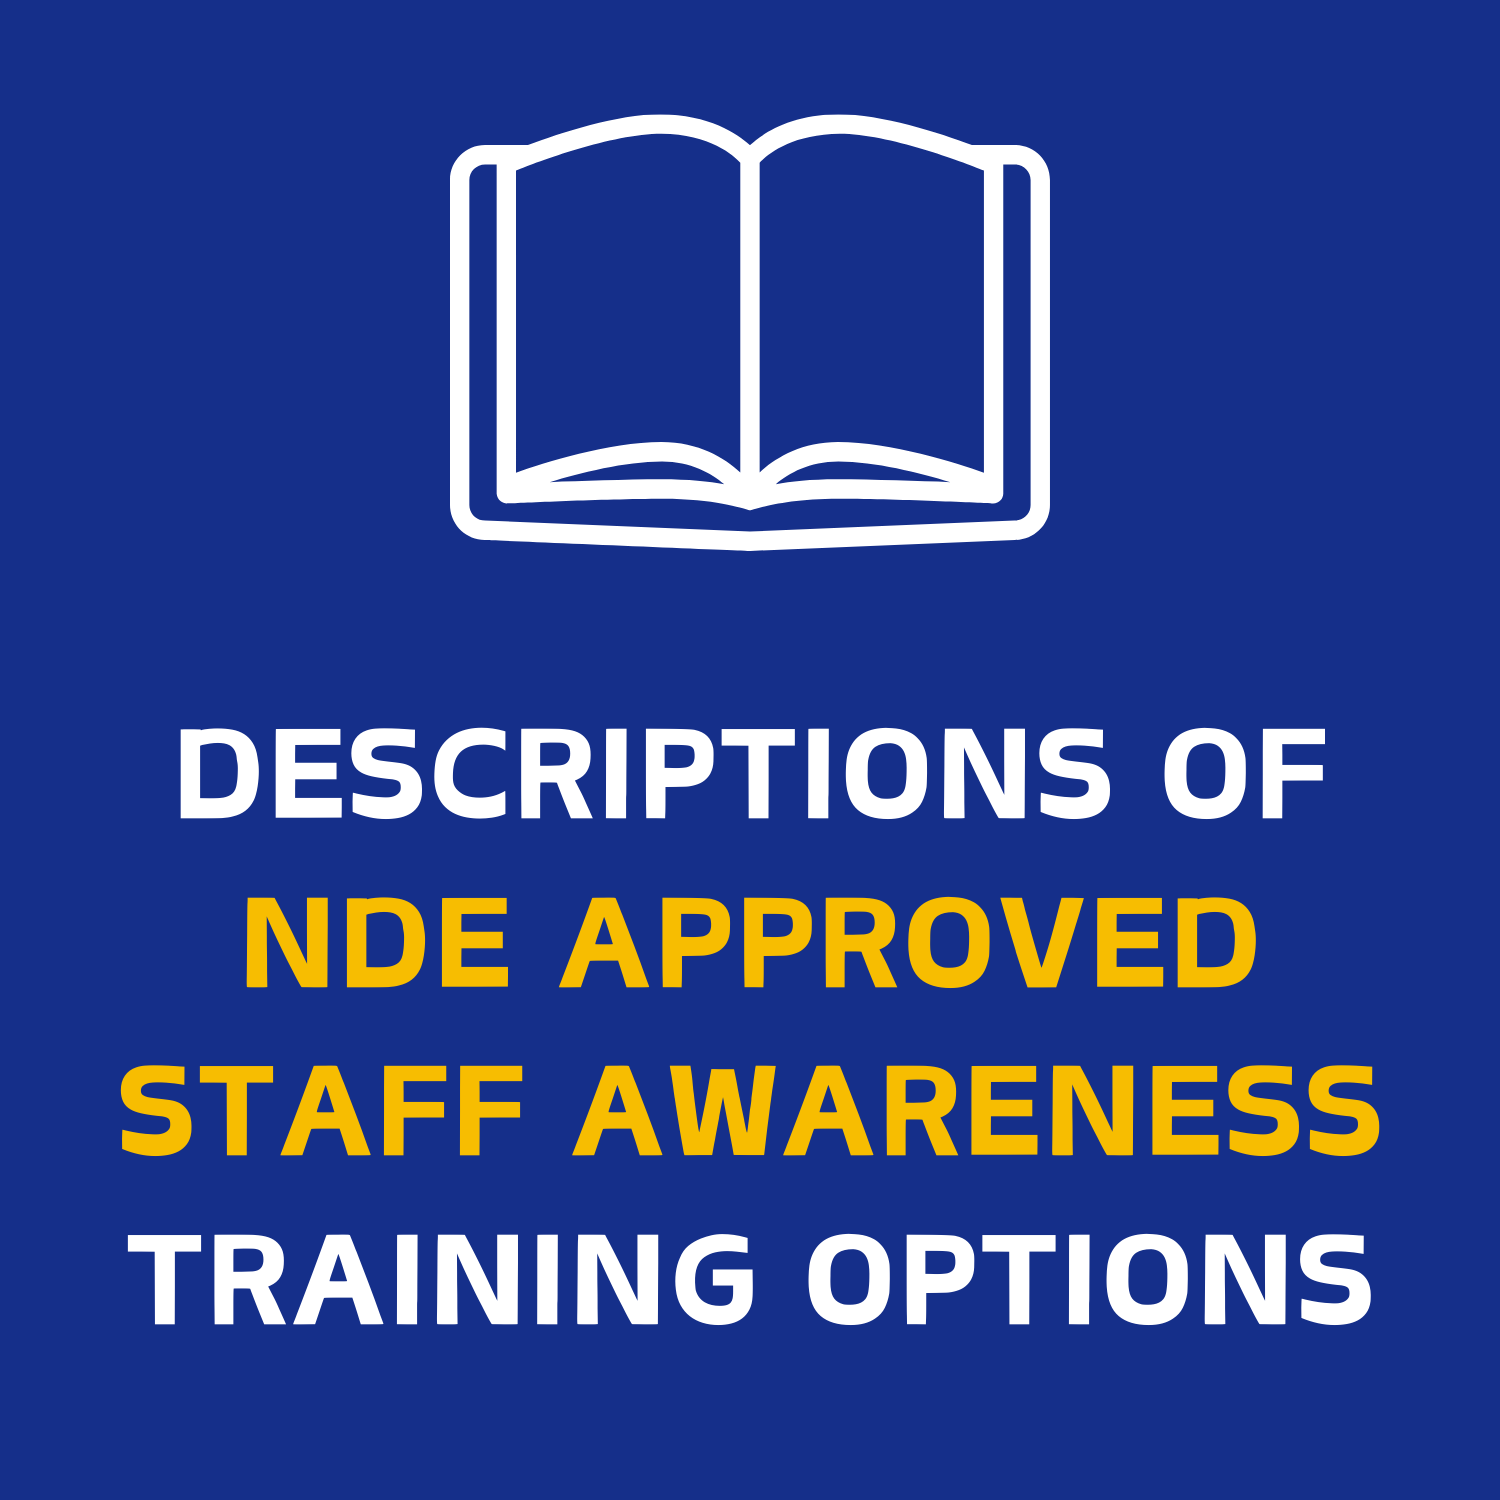 Descriptions of NDE Approved Staff Awareness Training Options